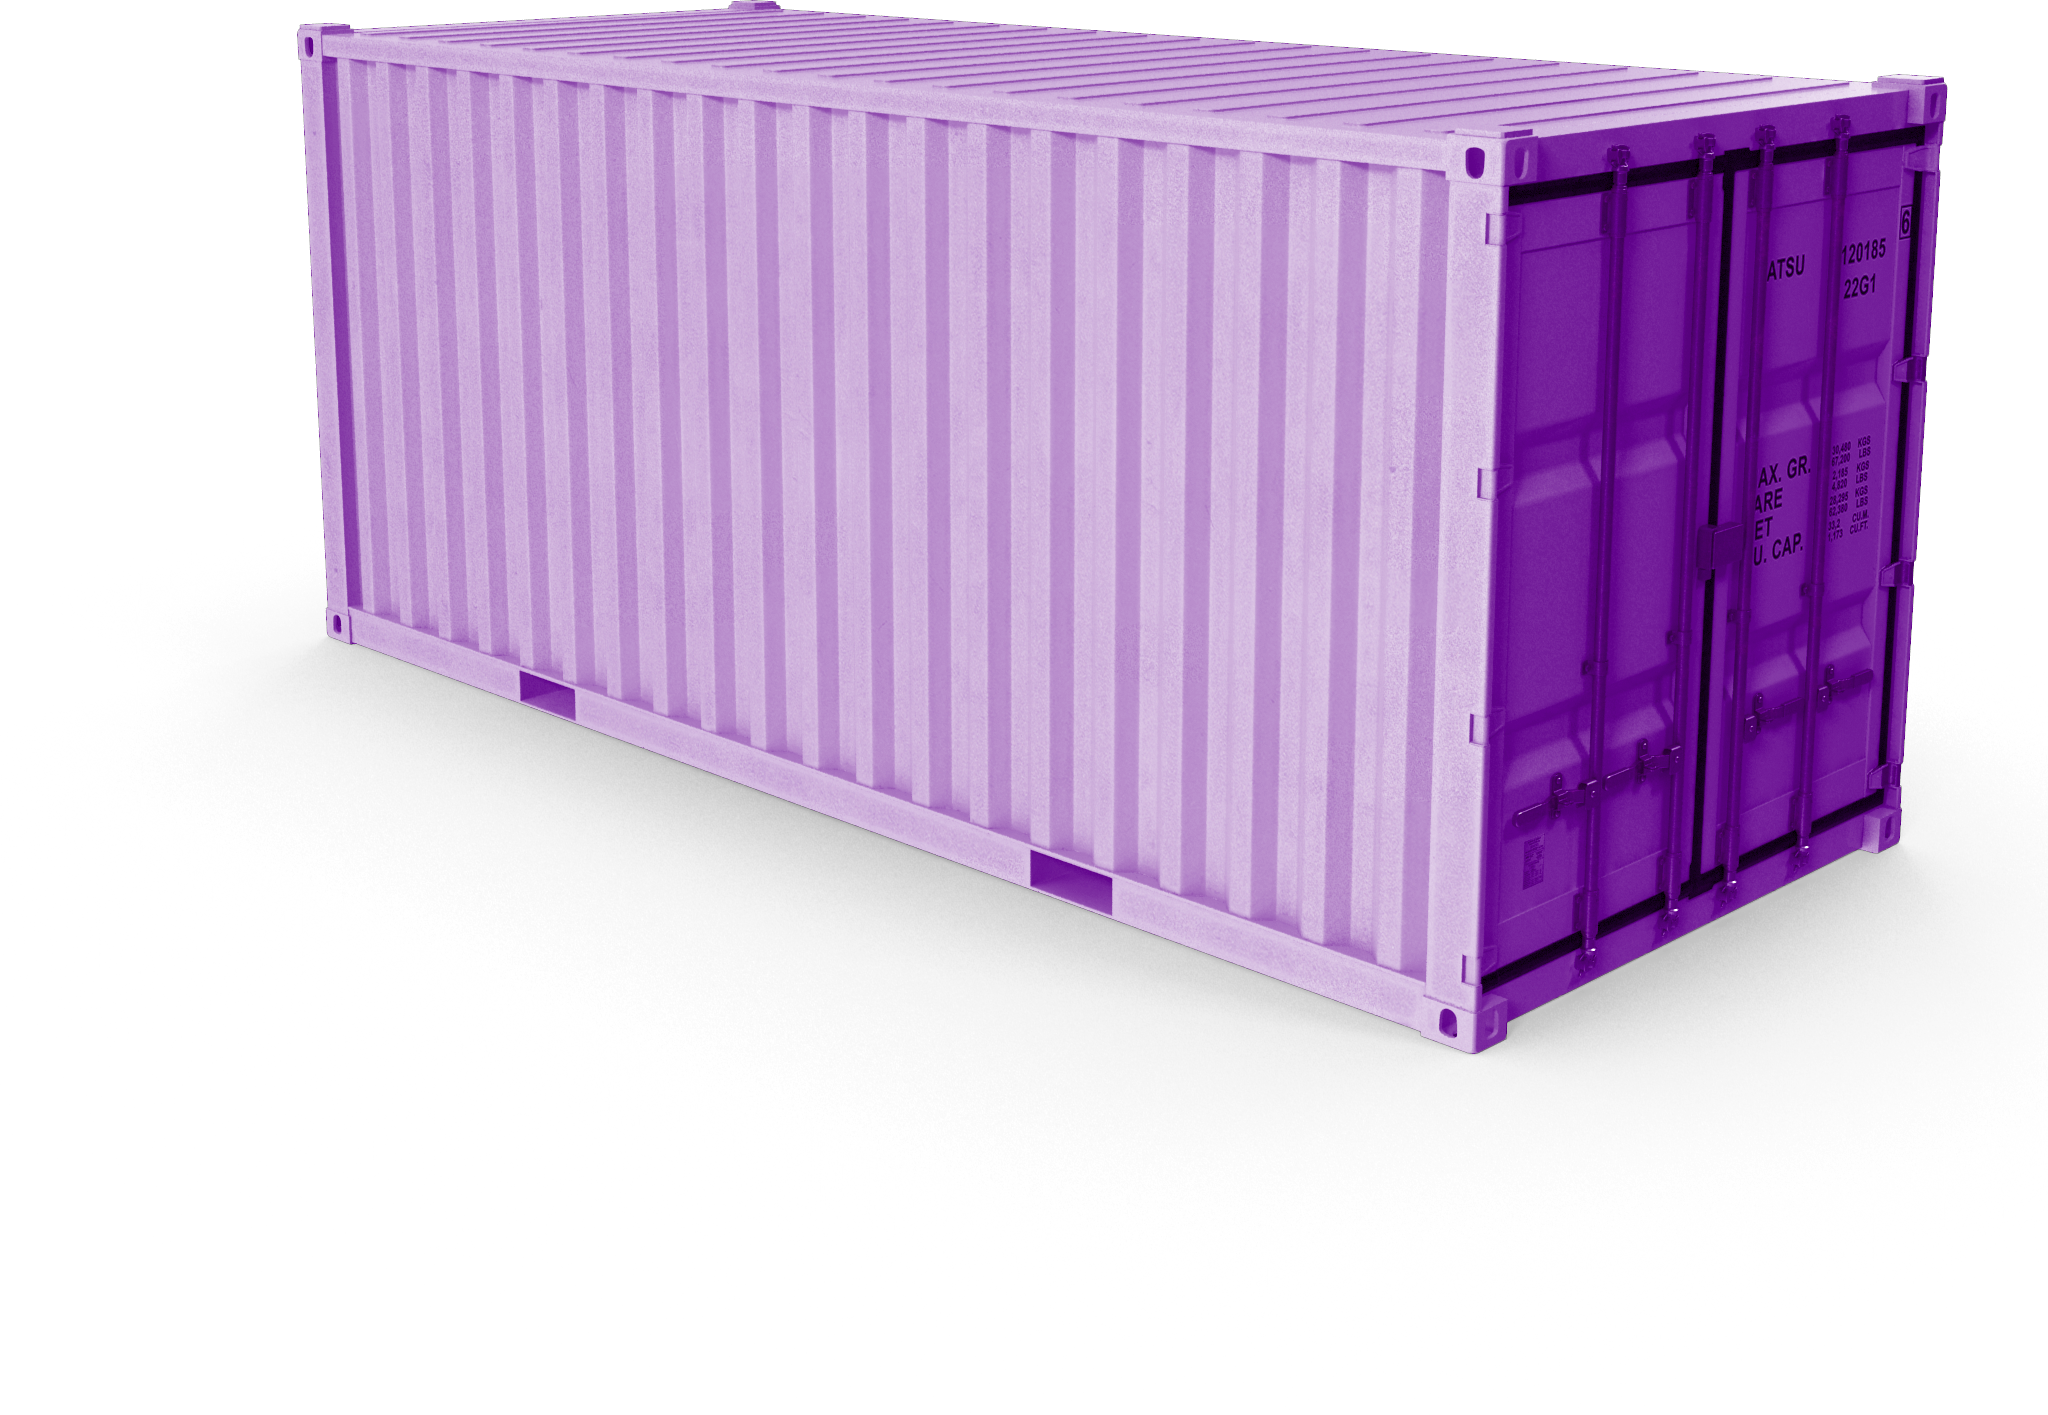 Shippingcontainer